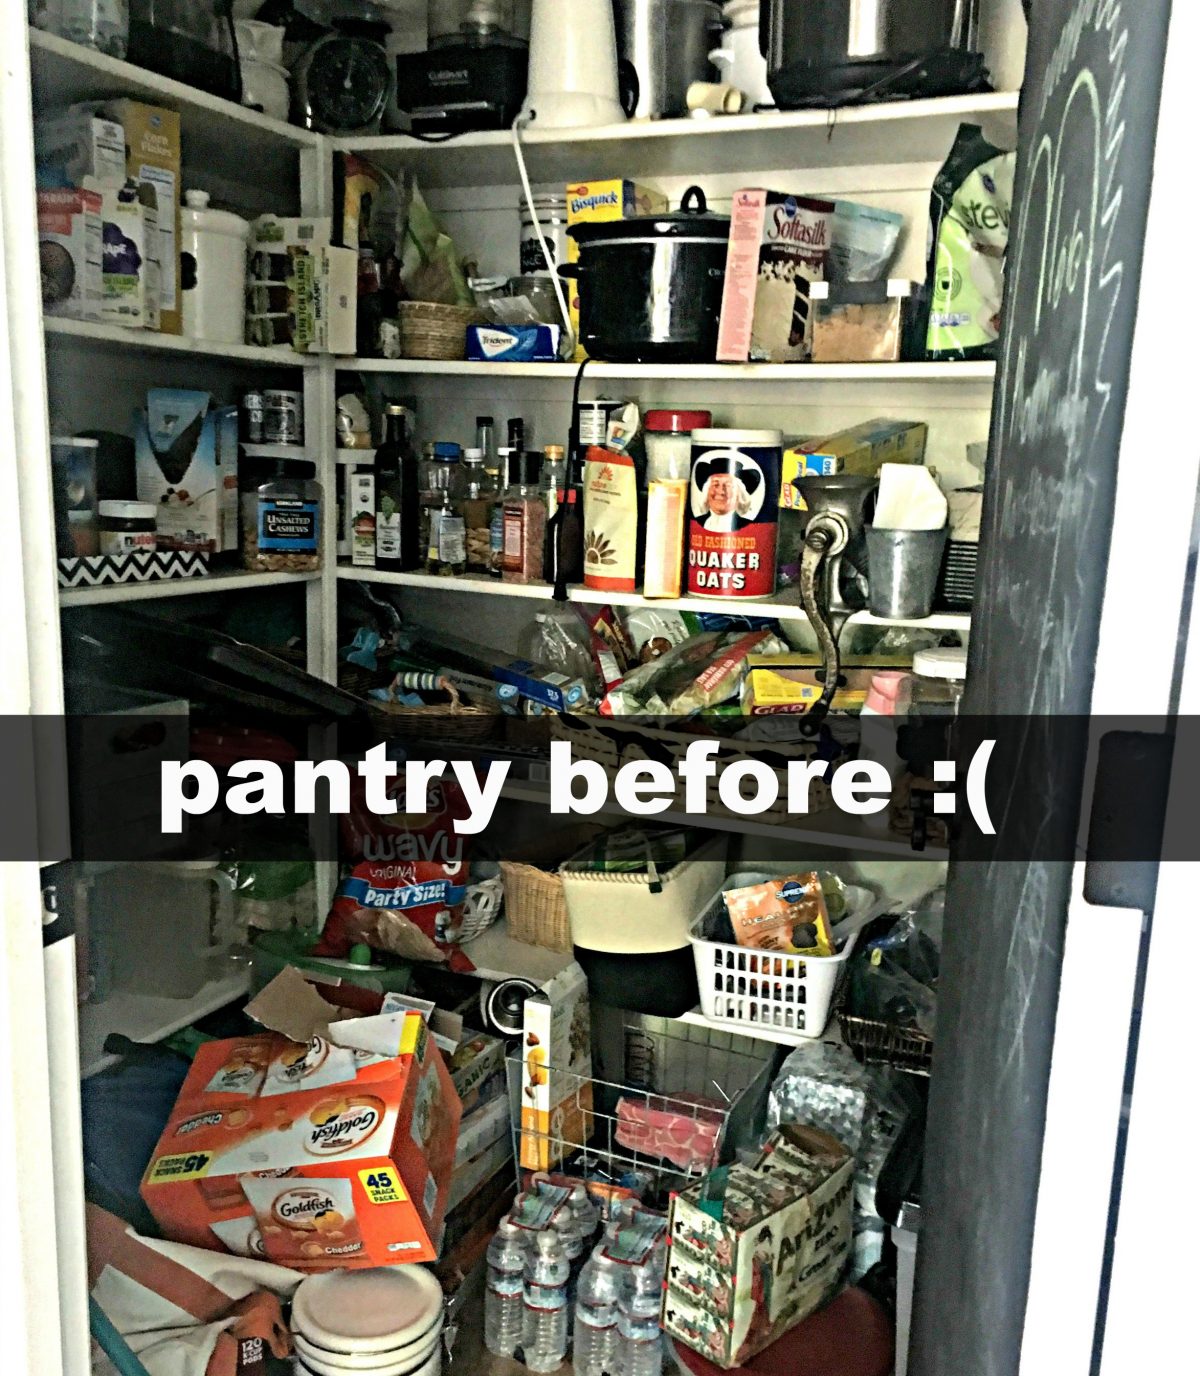 before filled walk-in pantry image with a sad emoji